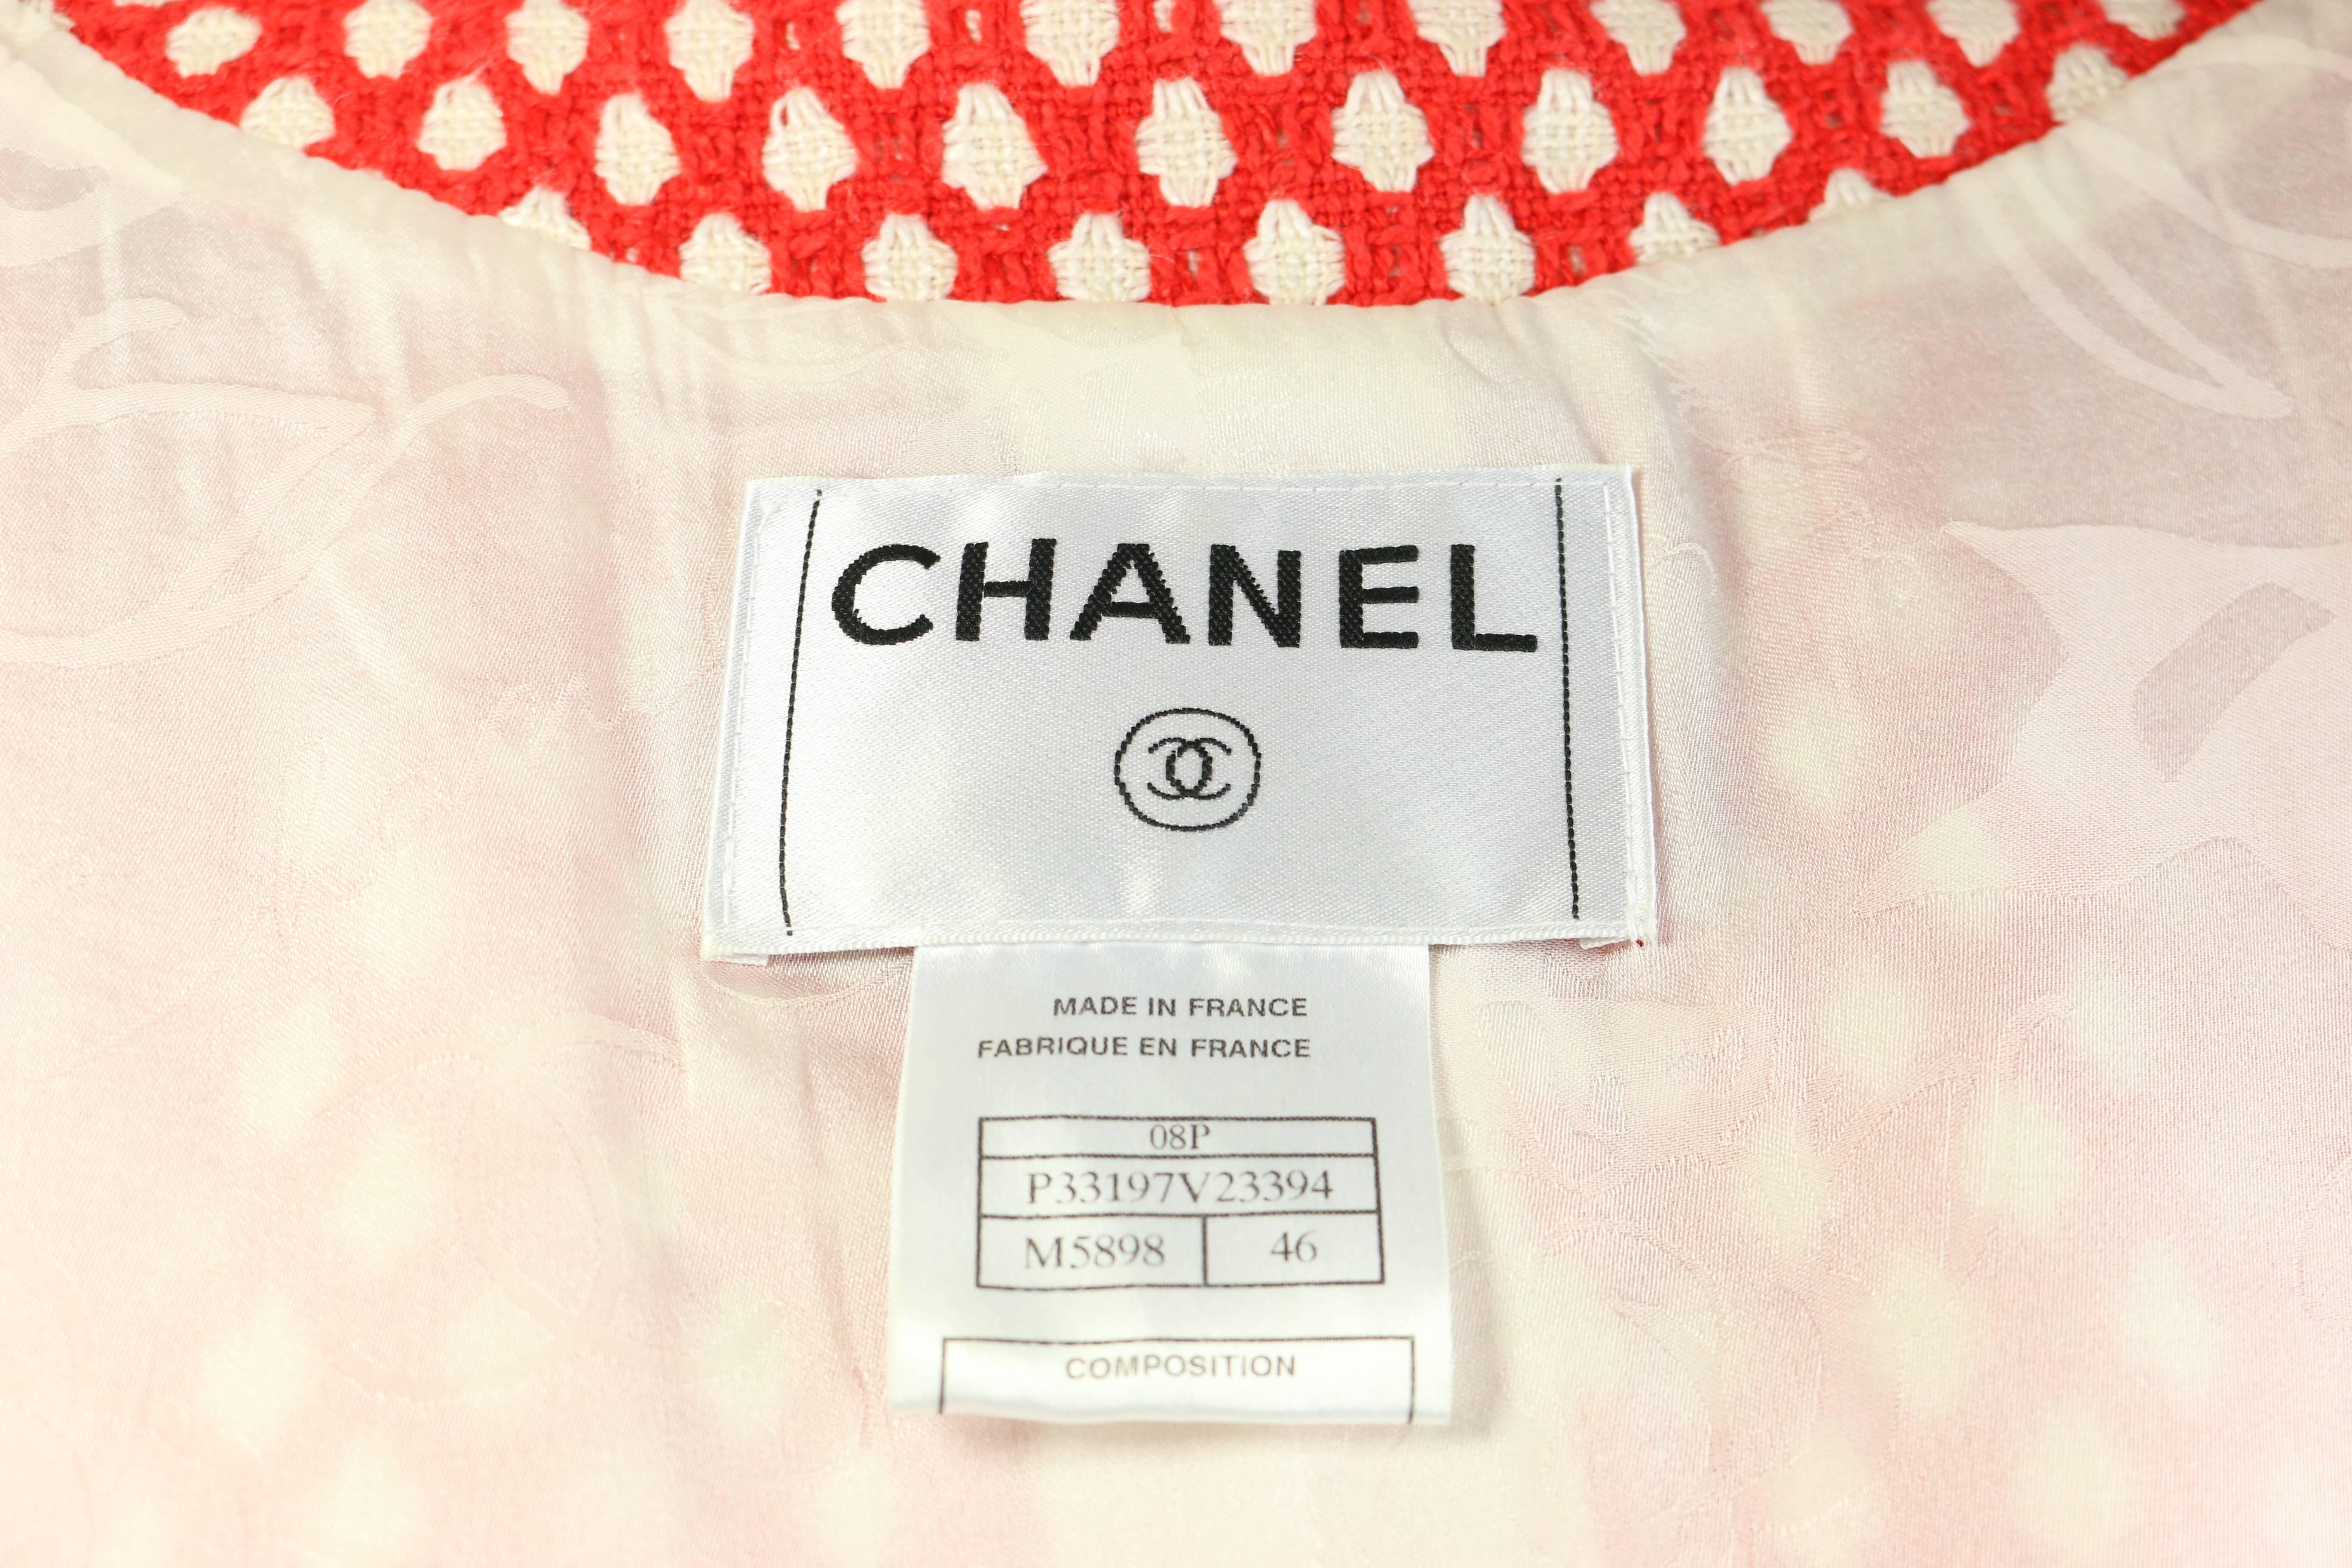 Women's 2008 Chanel Classic Red/White Polka Dot Tweed Jacket. 